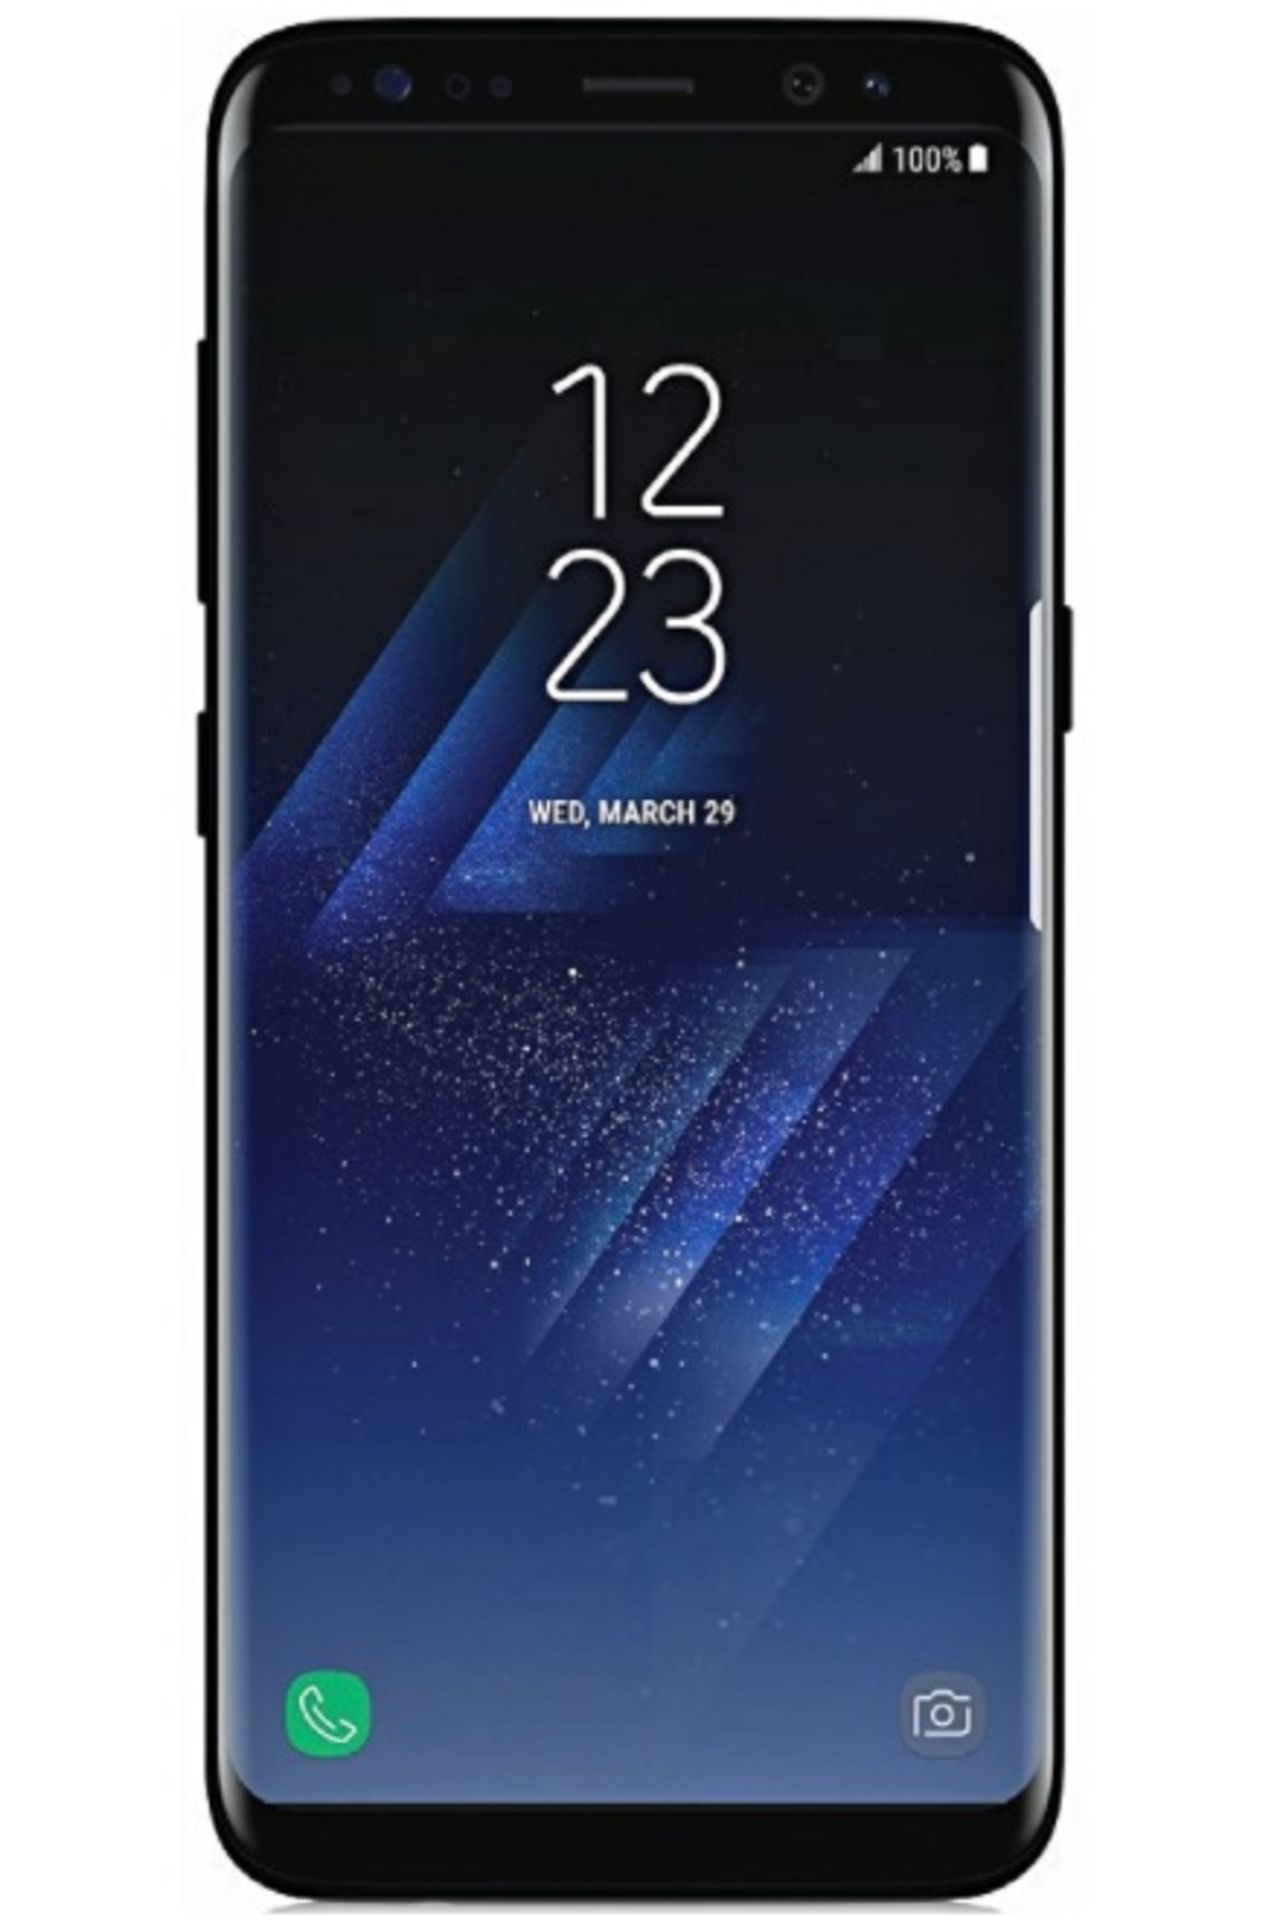 No VAT Grade A Samsung S8+ ( G9550F ) Colours May Vary - Item Available After Approx 15 Working